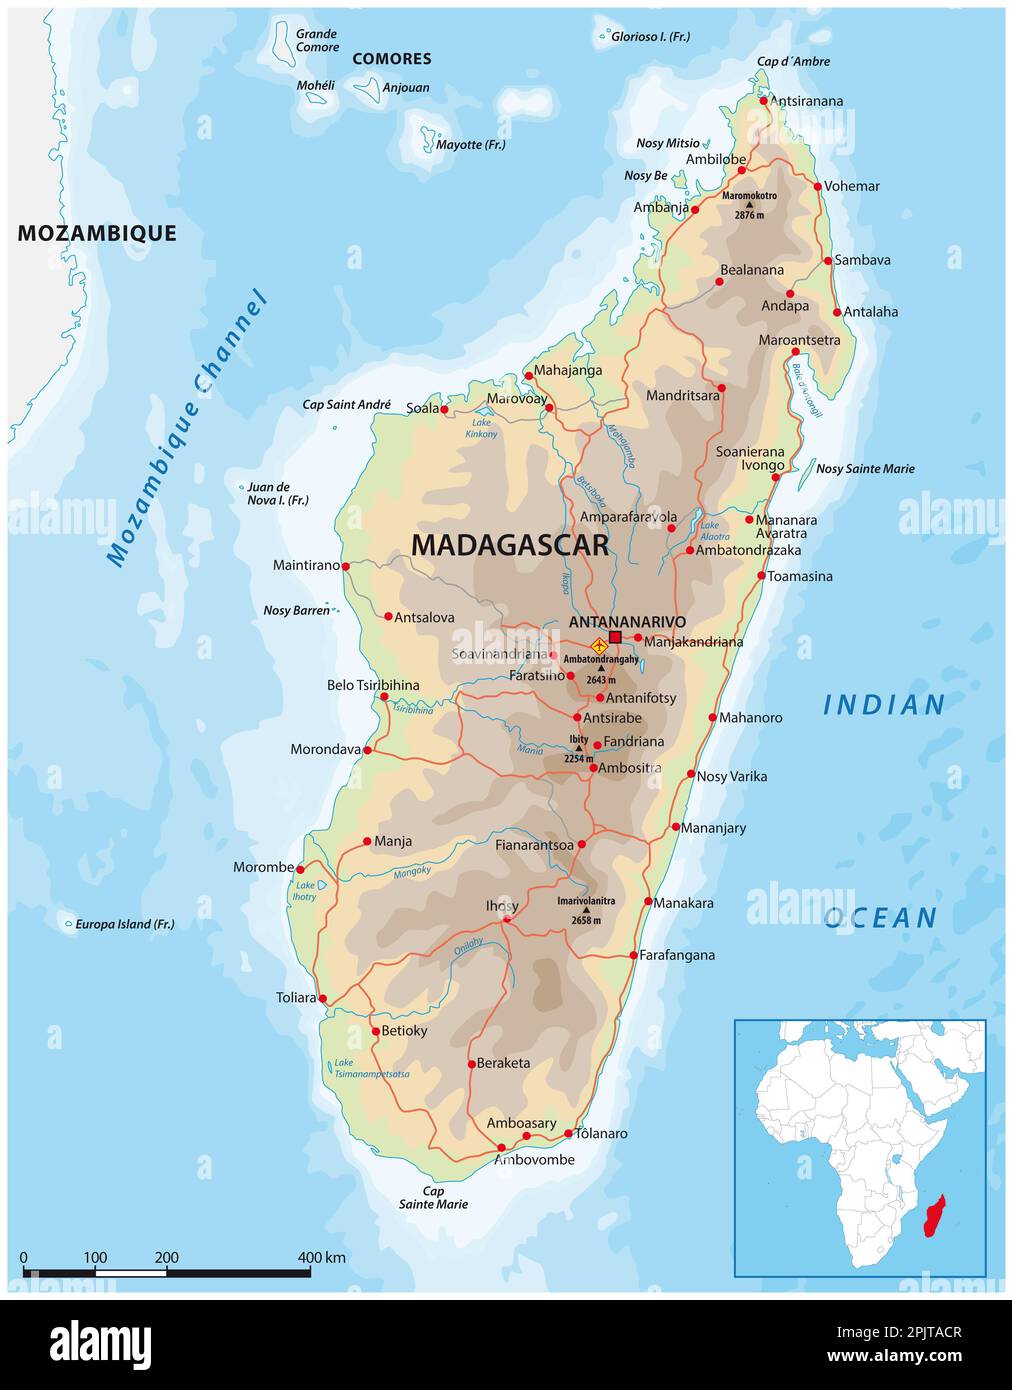 Detailed vector road map of the island nation of Madagascar Stock Photo